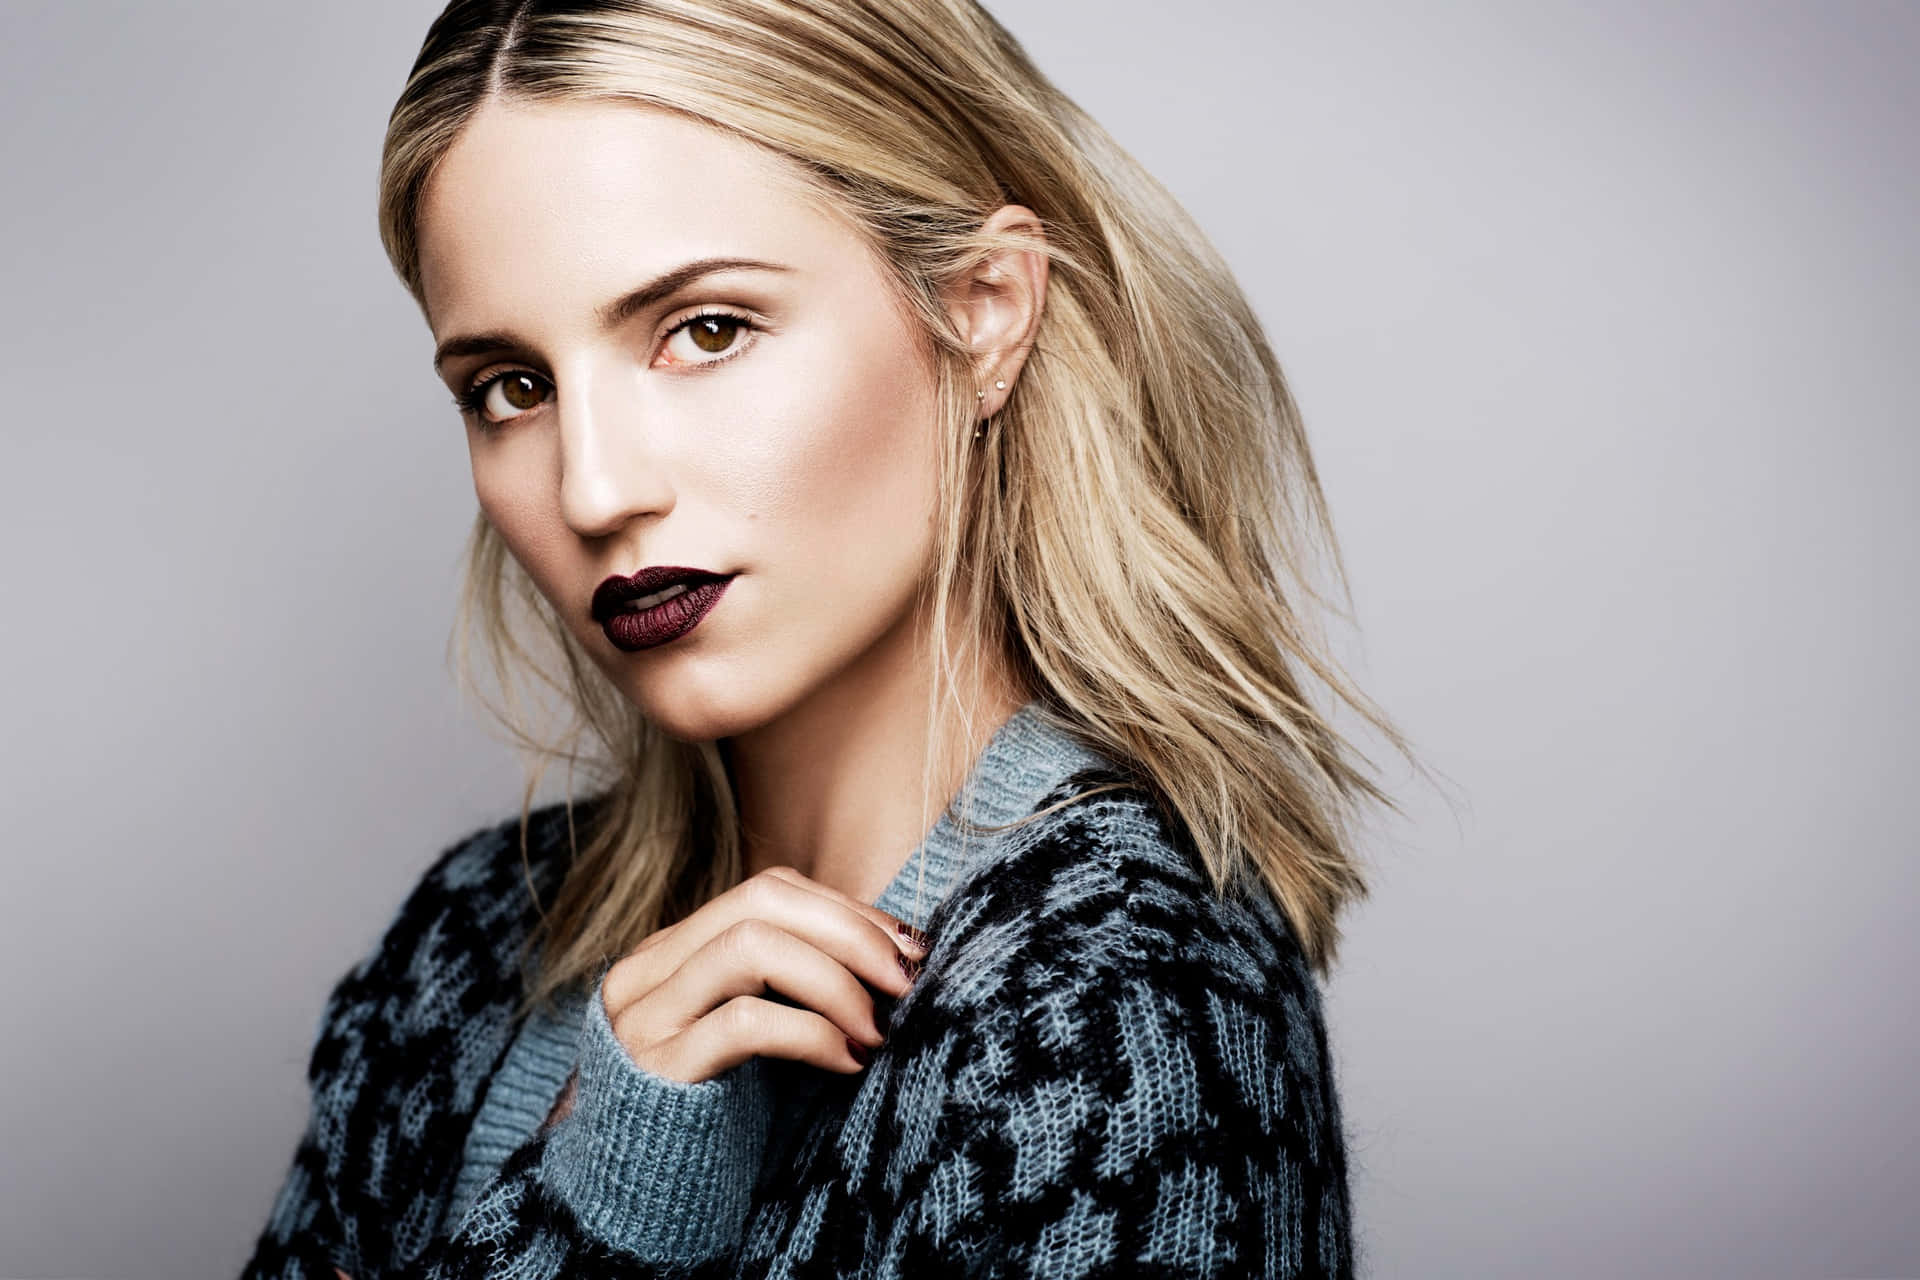 Dianna Agron posing in front of a nature landscape Wallpaper